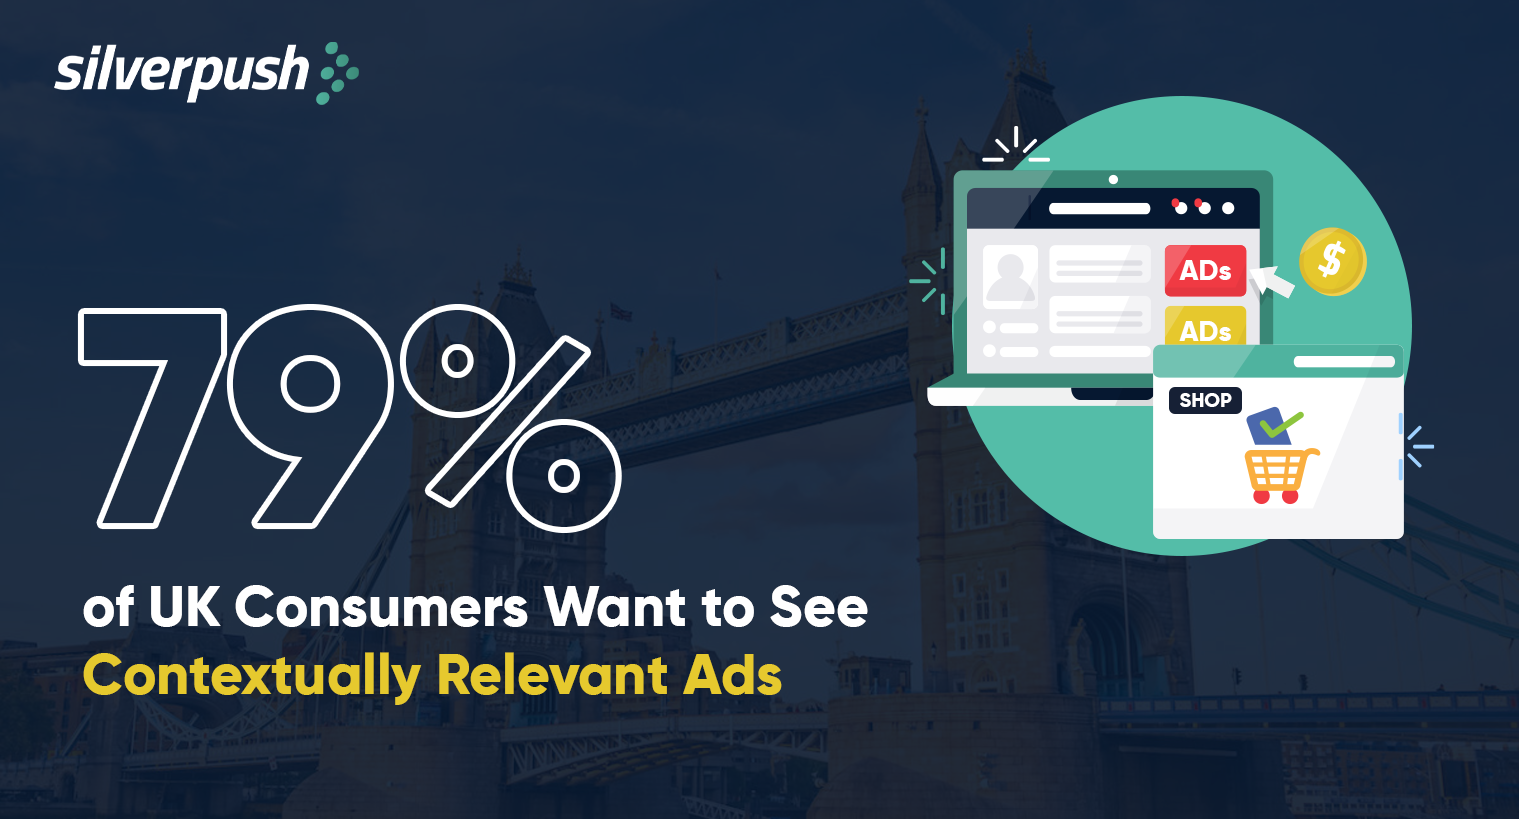 79-of-UK-consumers-prefer-viewing-contextually-relevant-ads-Silverpush